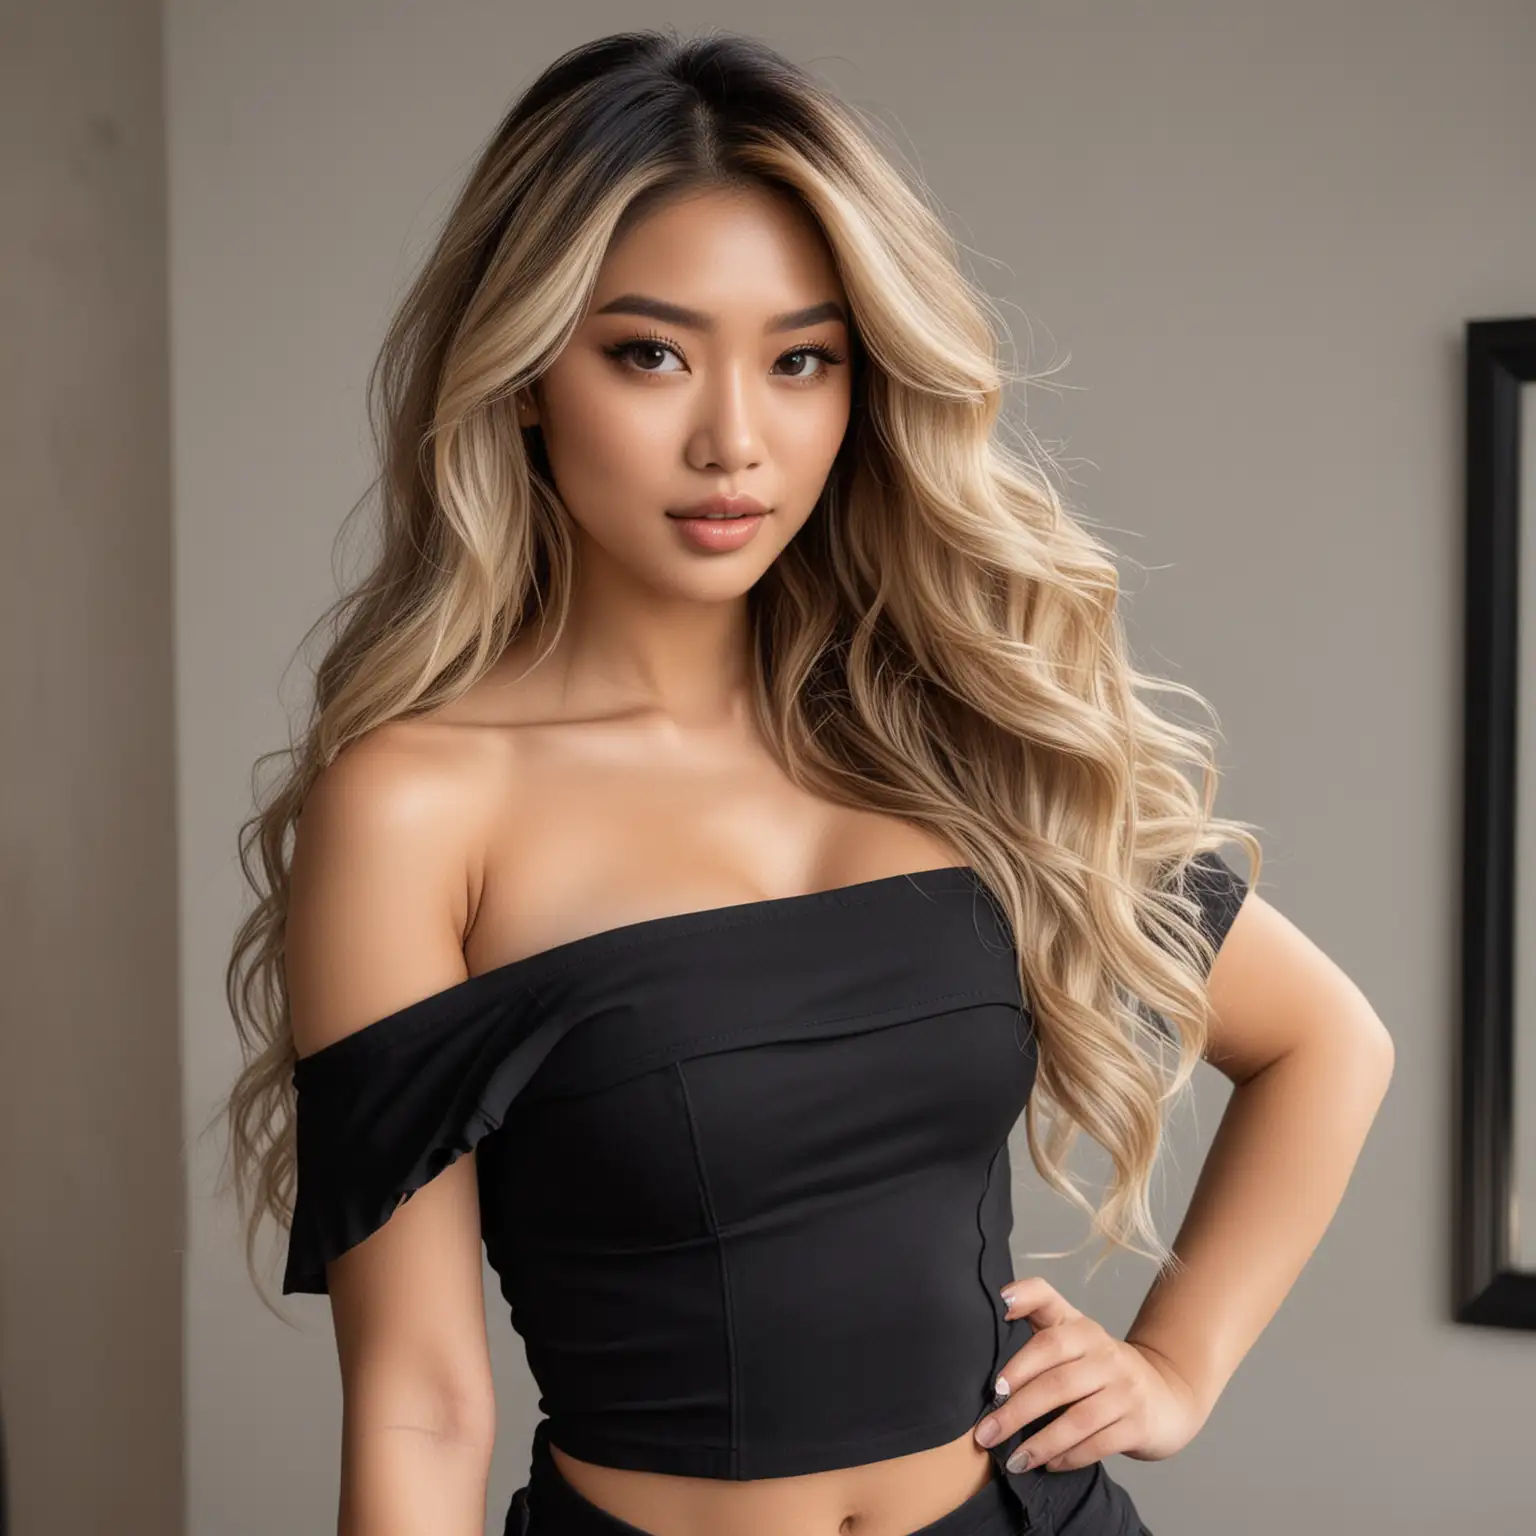 mixed asian hair model in long luscious wavy dimensional light blonde balayage hair. wearing off the shoulder black outfit. She is posing. she has heavy dark eye makeup. photo frame waist up.